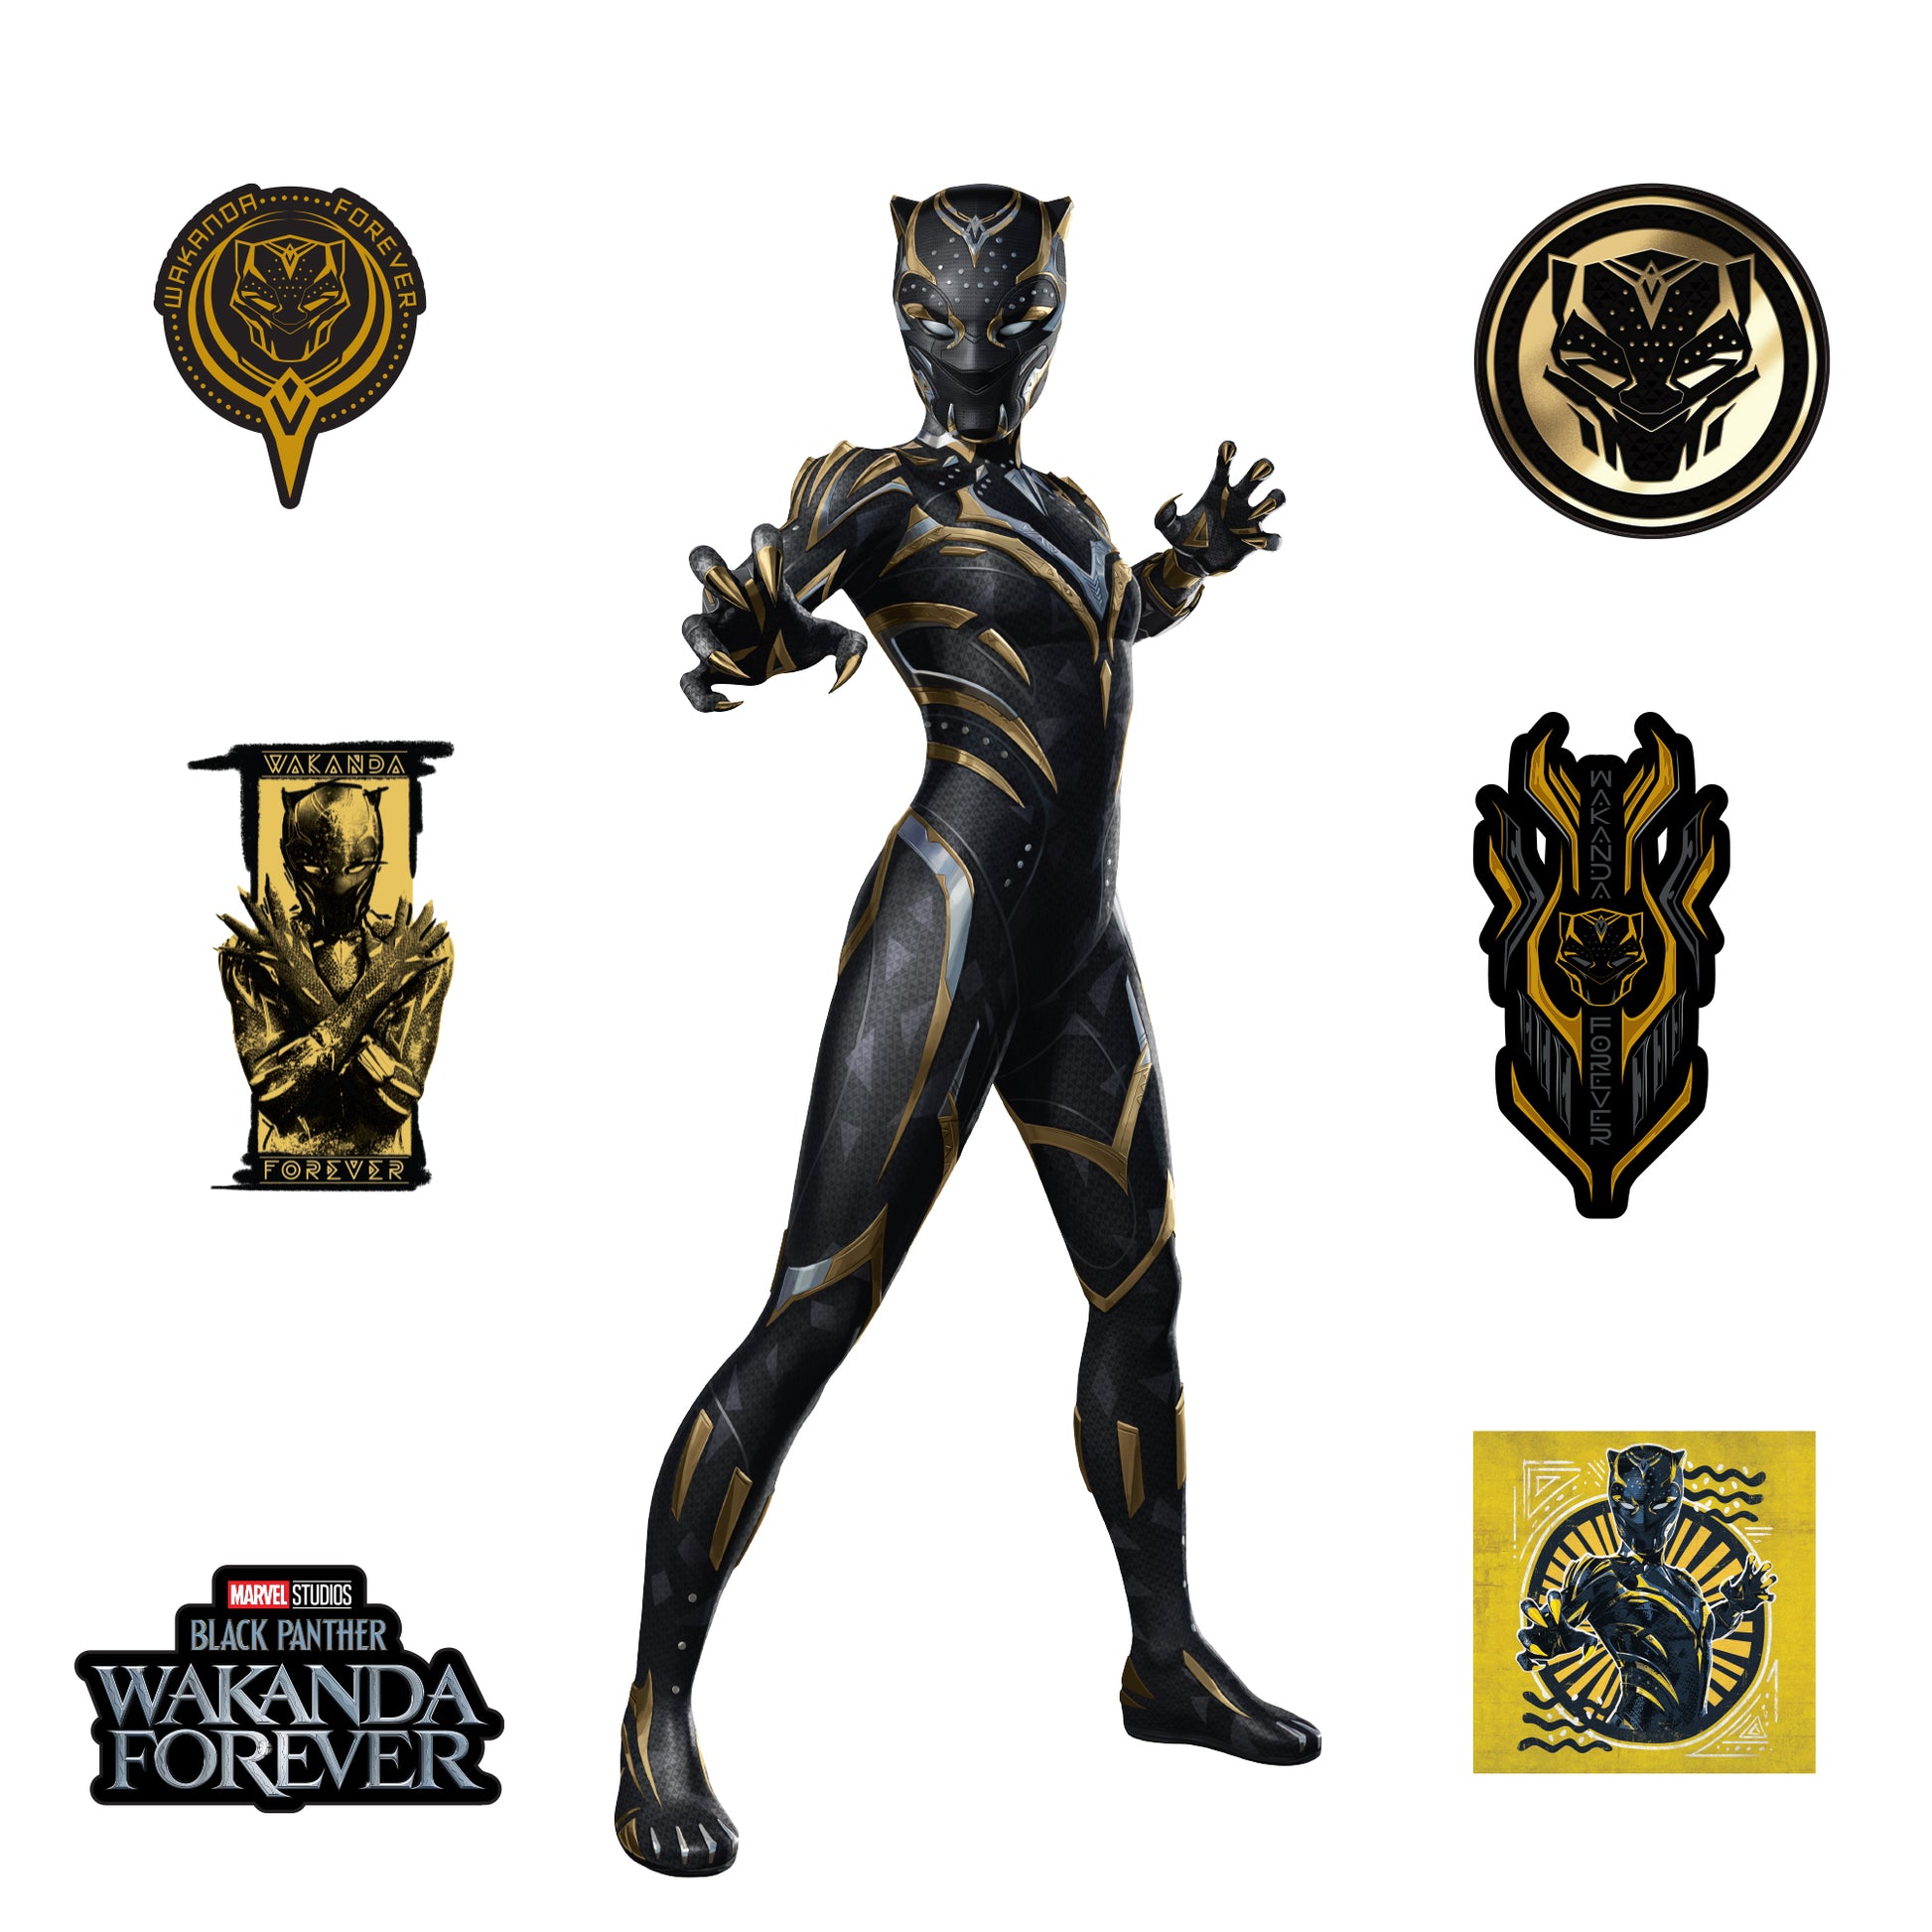 Black Panther: Wakanda Forever - Marvel Removable Adhesive Wall Decal Large